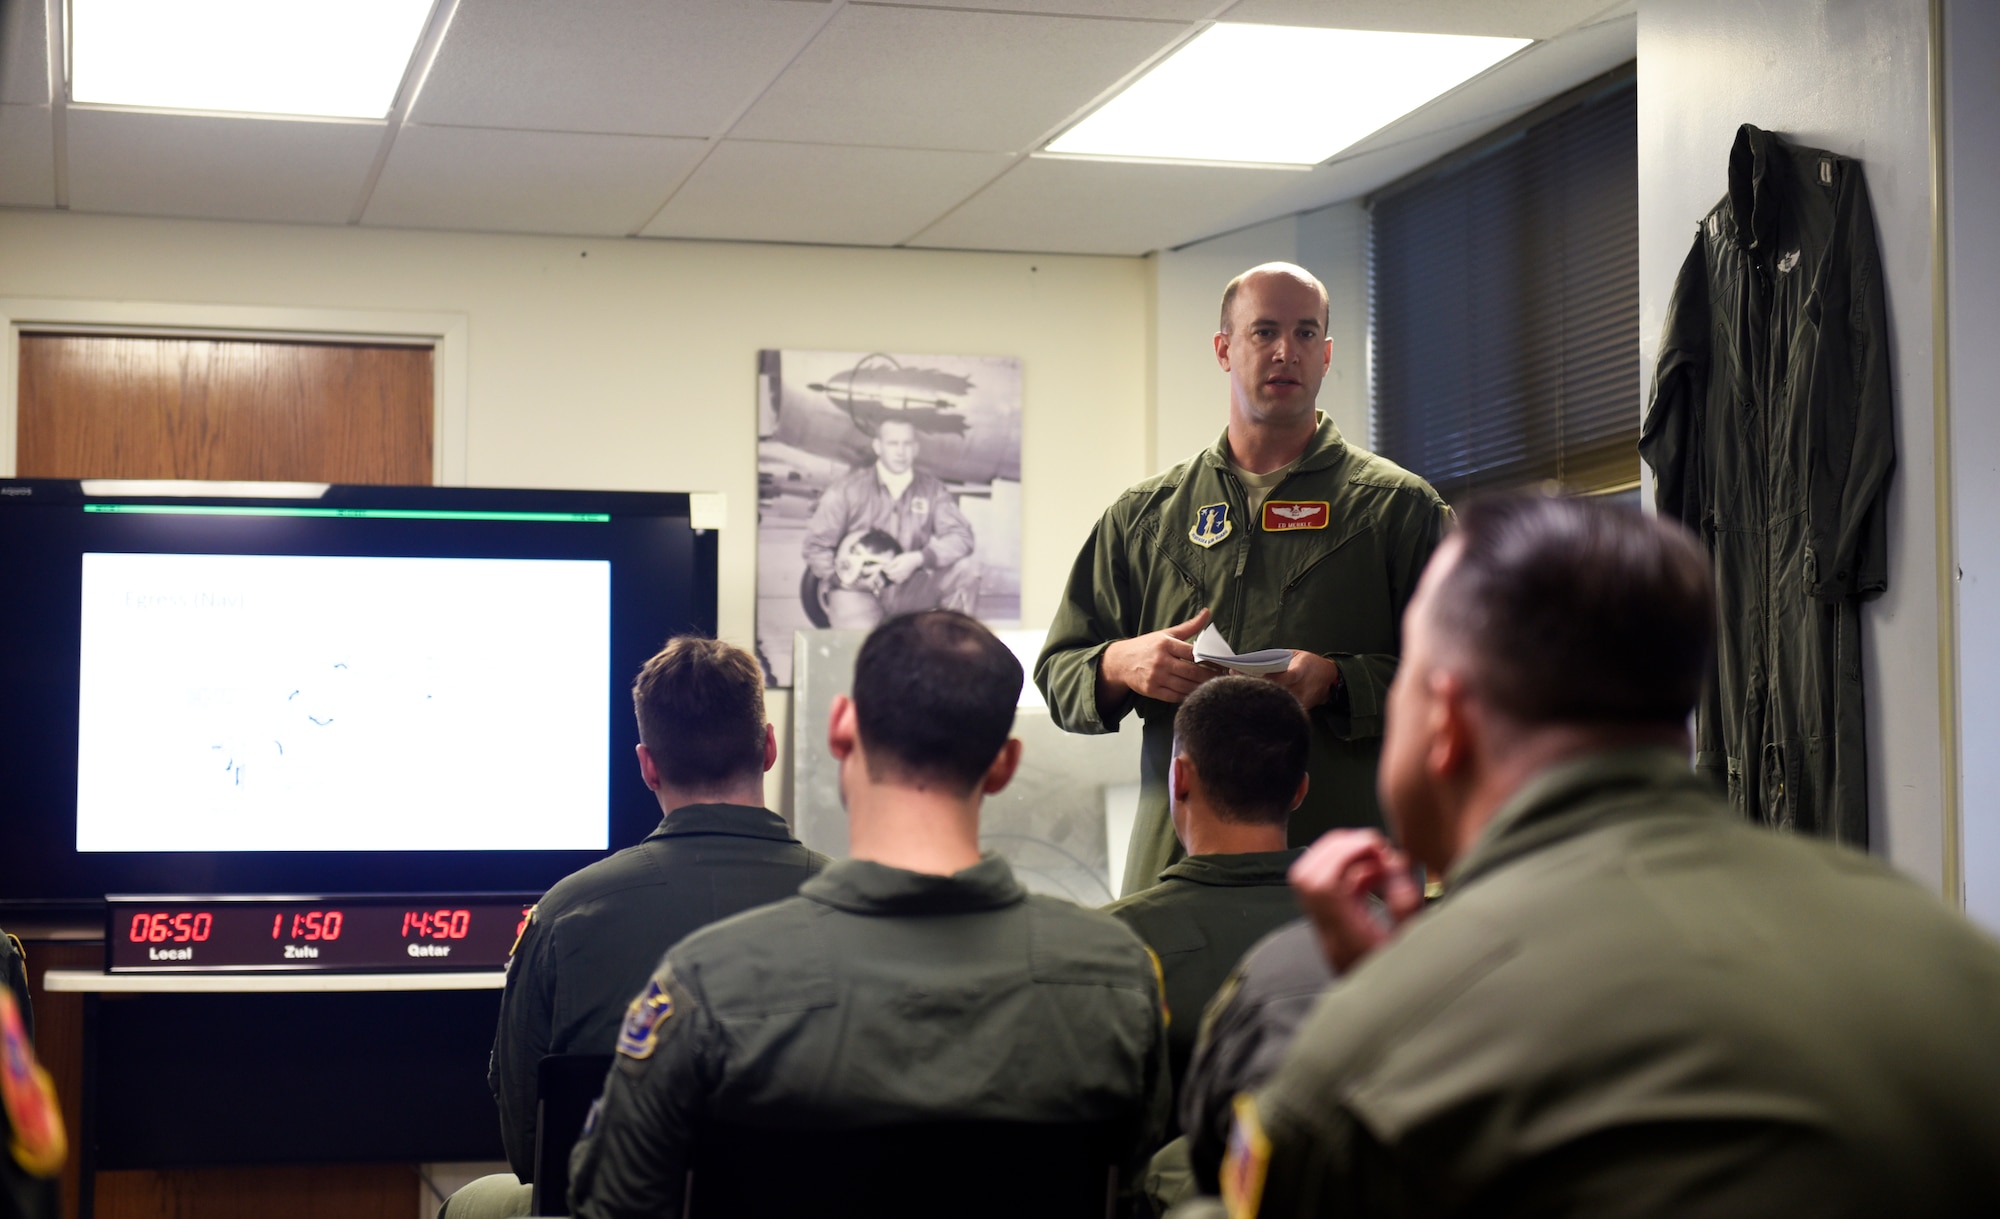 Nebraska National Guard Maj. Ed Merkle, 238th Combat Training Squadron navigator, briefs emergency egress procedures during a preflight briefing before departing for a weekend training sortie at Offutt Air Force Base, Nebraska Aug. 5, 2018. The objective of the briefing is to communicate a common operating picture of meteorological and aeronautical information to the entire crew necessary for the conduct of a safe and efficient flight. (U.S. Air Force photo by 2nd Lt. Drew Nystrom)